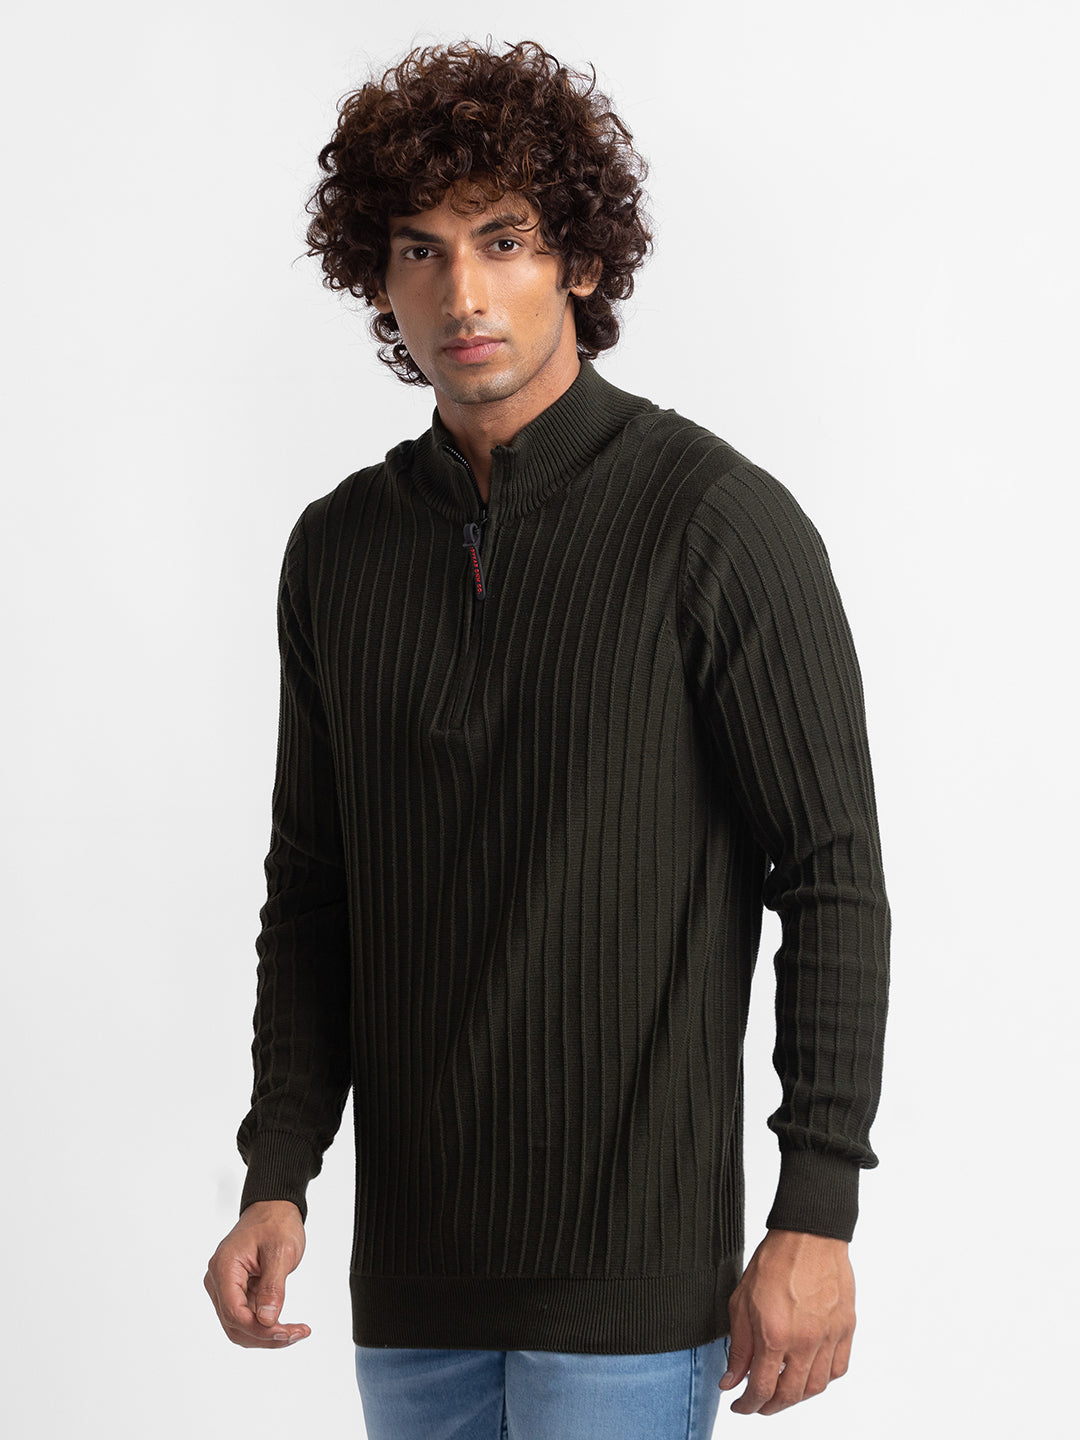 Spykar Olive Green Cotton Full Sleeve Casual Sweater For Men